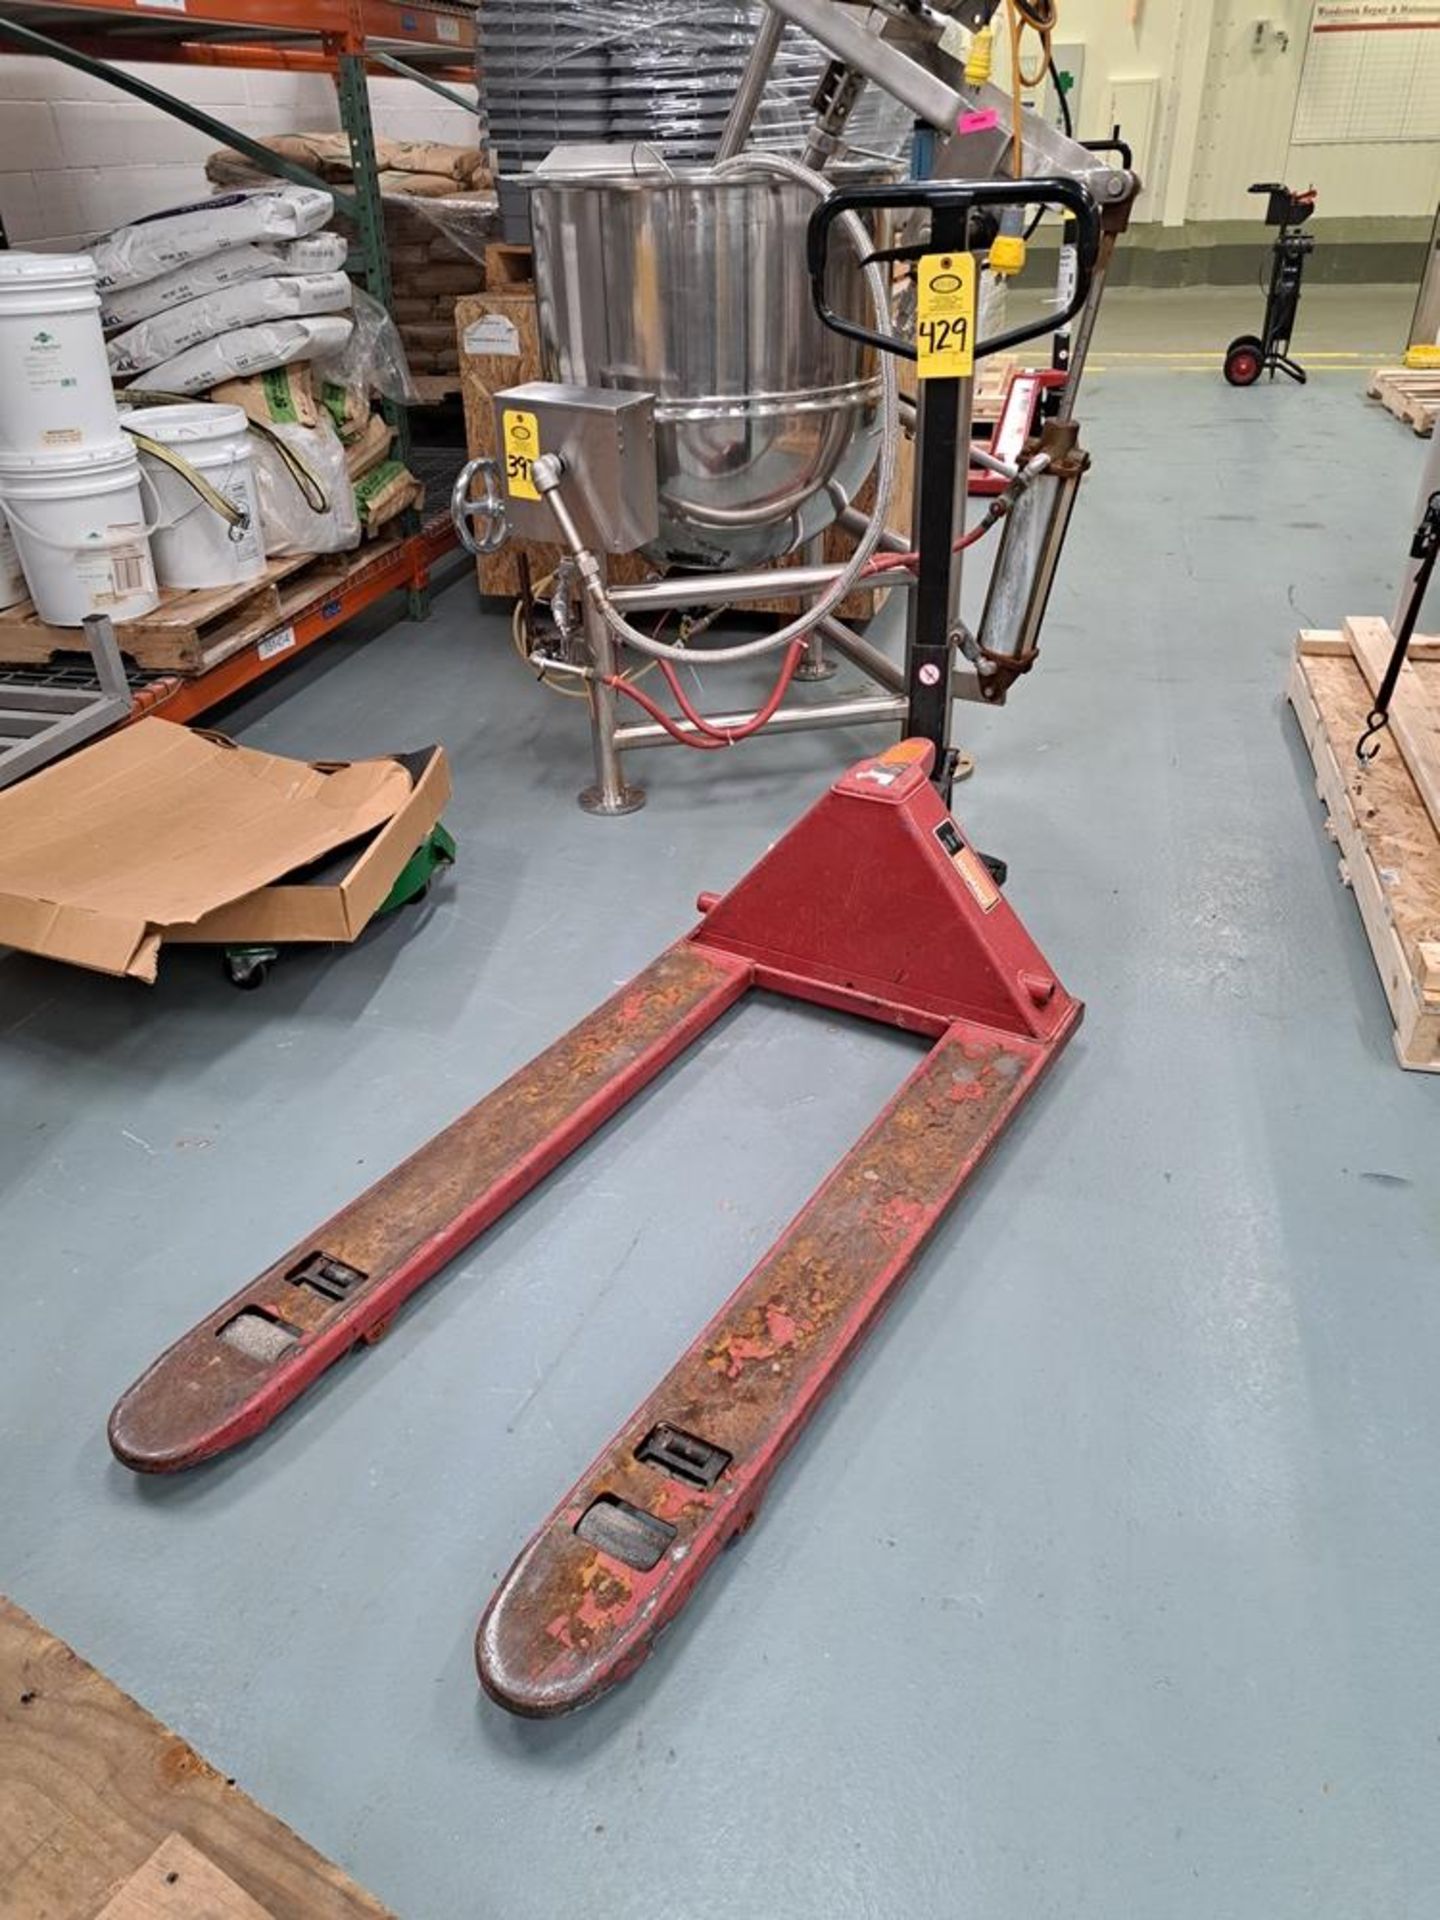 Dayton Pallet Jack, 5500 Lb. capacity-Removal Is By Appointment Only-All Small Hand Carry Items-